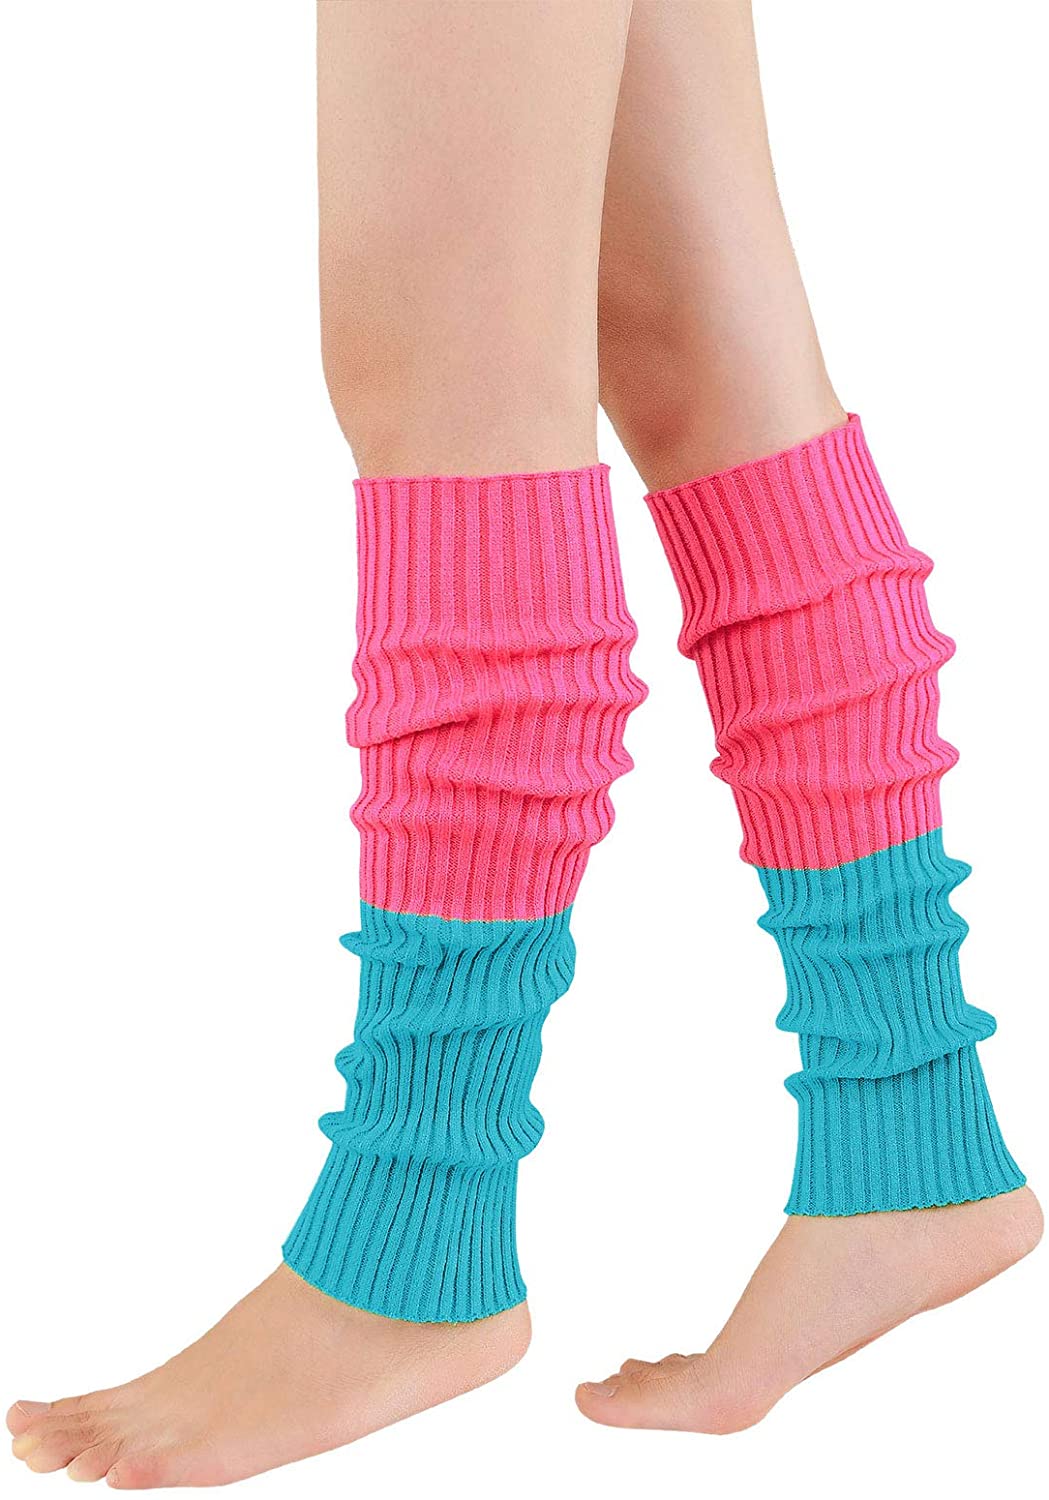 Leg Warmers for Women 80s Neon Knit Ribbed Leg Warmers for Dance Yoga Sports Party Accessories 